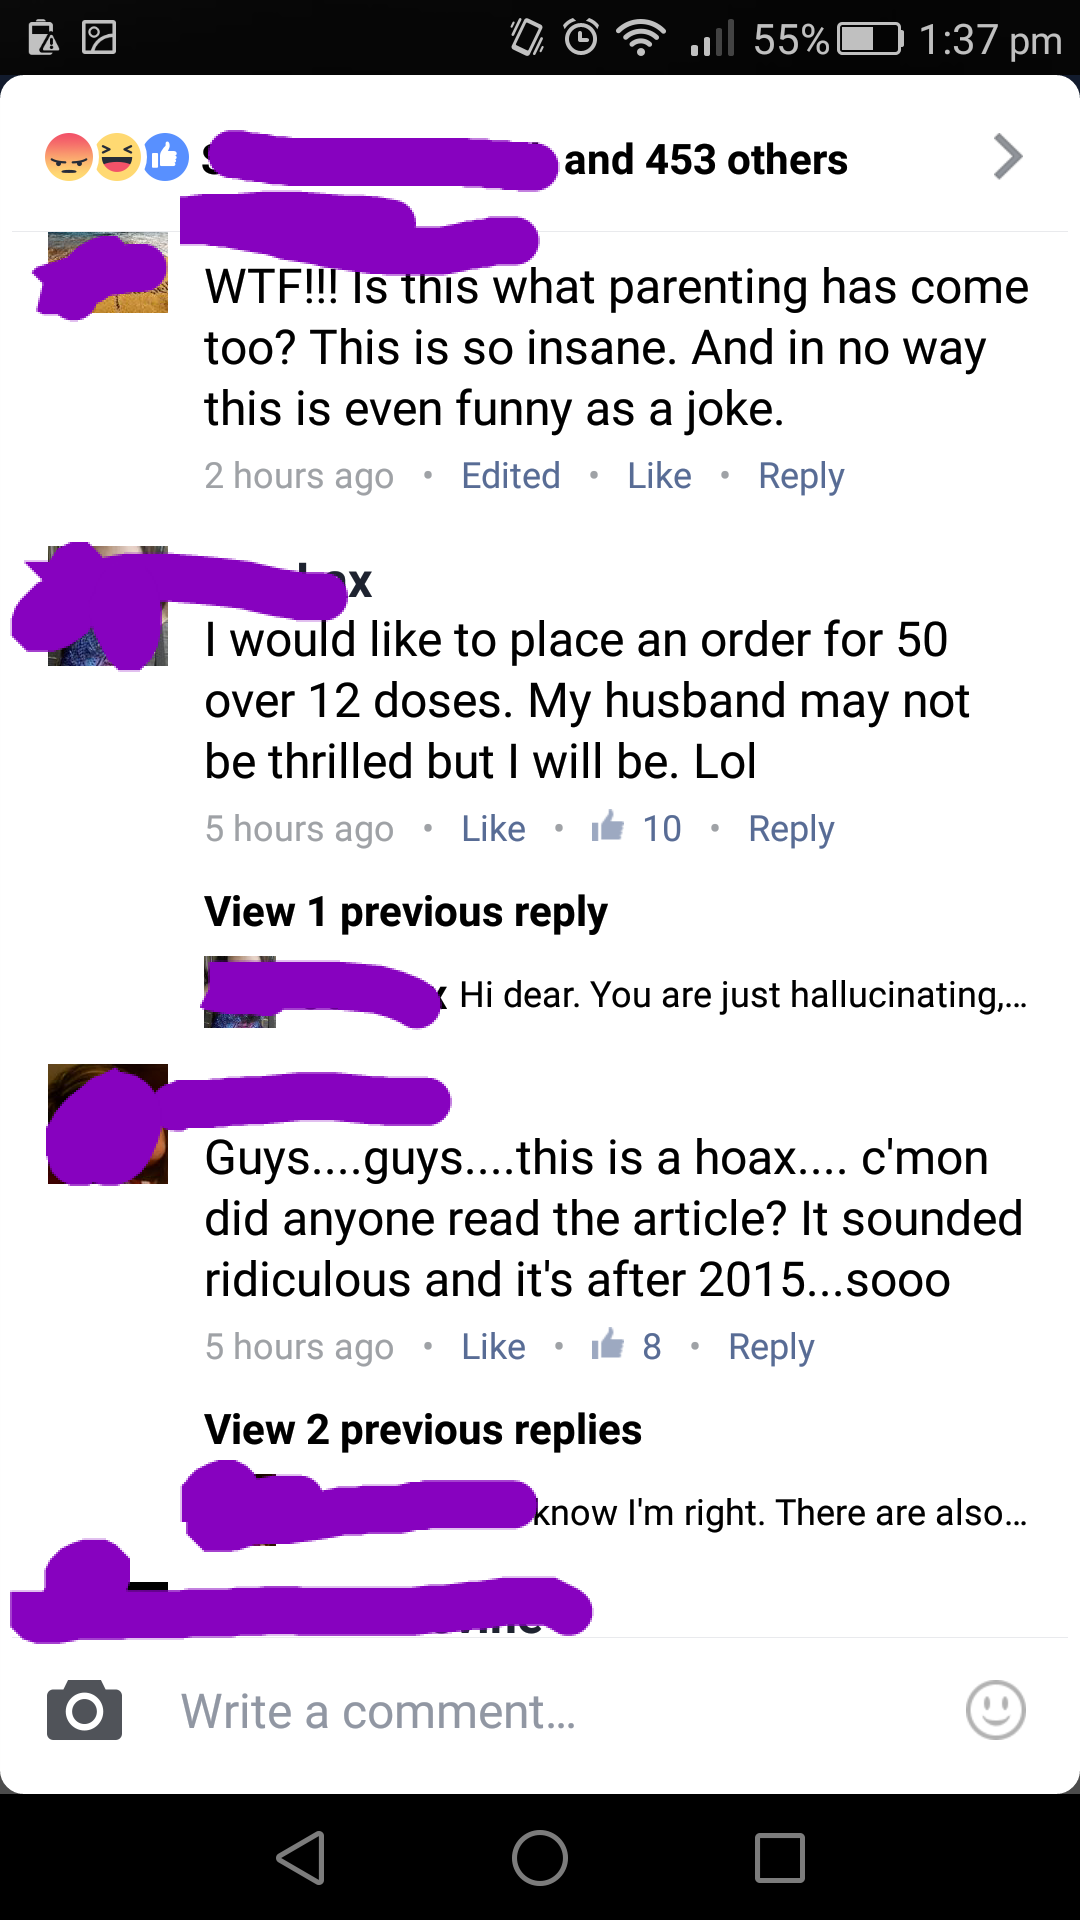 Fake News Article Triggers Hundreds Of Gullible People Online